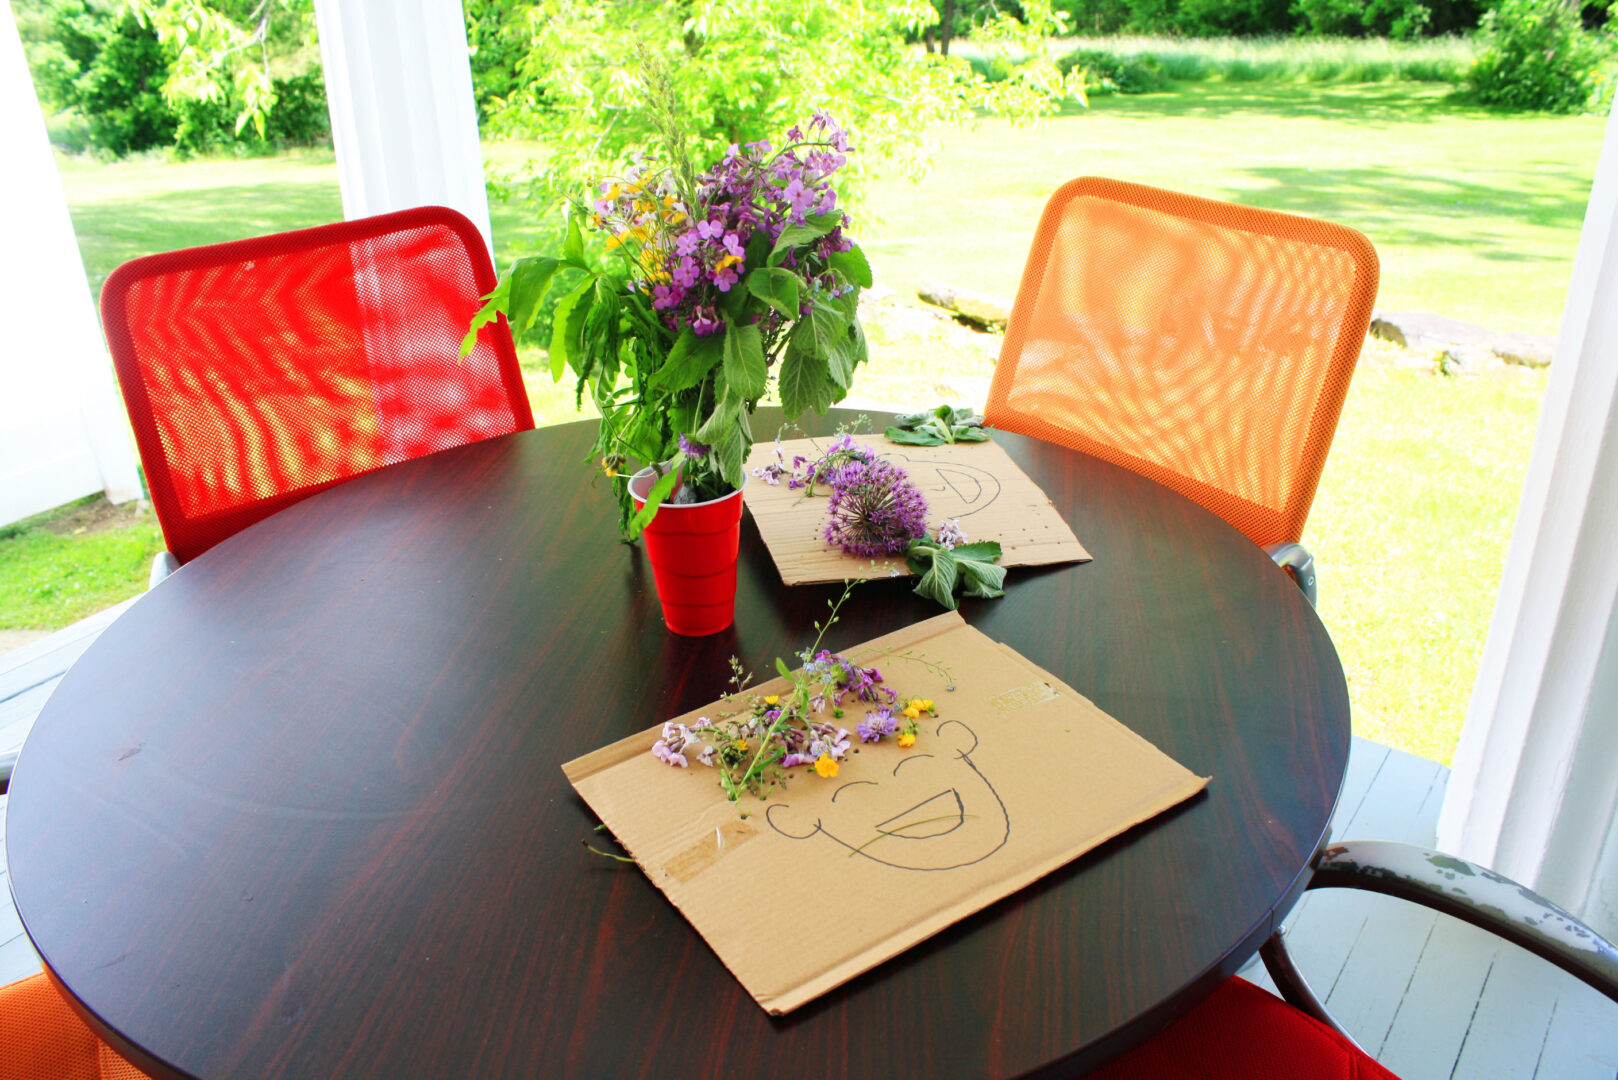 A round table outside holds cardboard artwork with flowers as hair on a person's face. Purple flowers in a red plastic cup on the table.